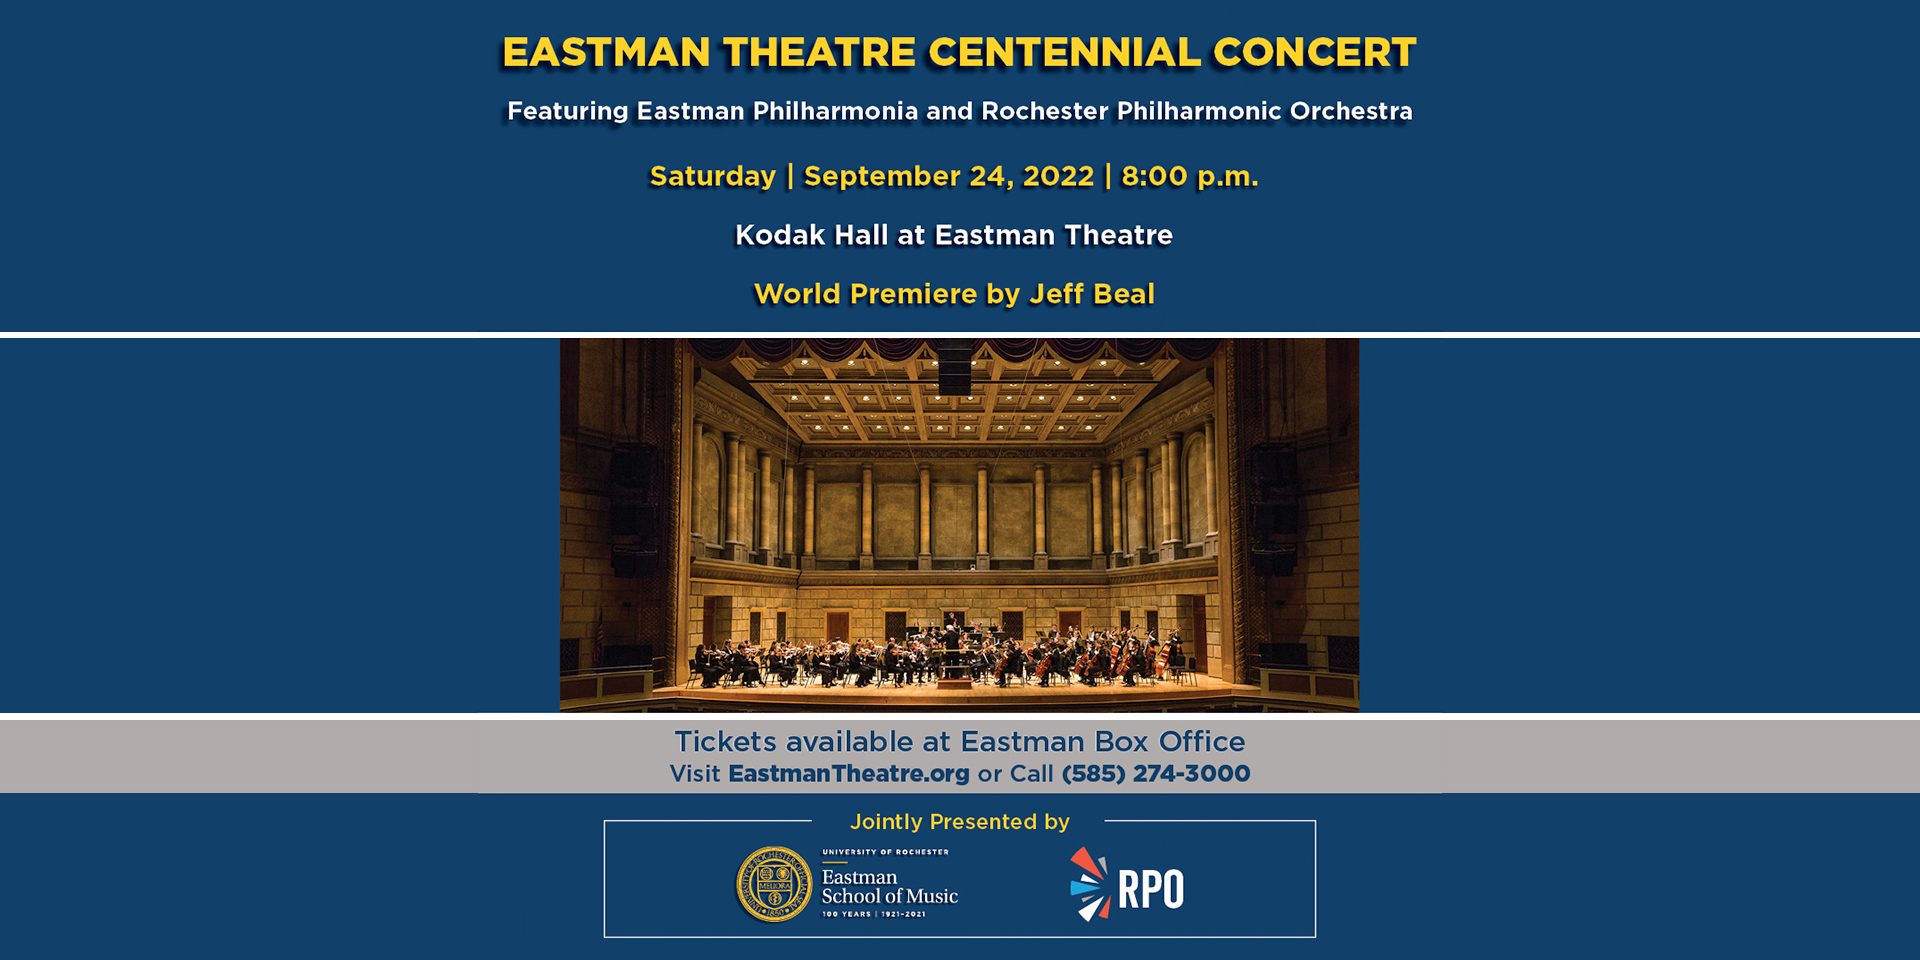 Eastman School of Music and Rochester Philharmonic Orchestra Jointly  Present “Eastman Theatre Centennial Concert” – Eastman School of Music